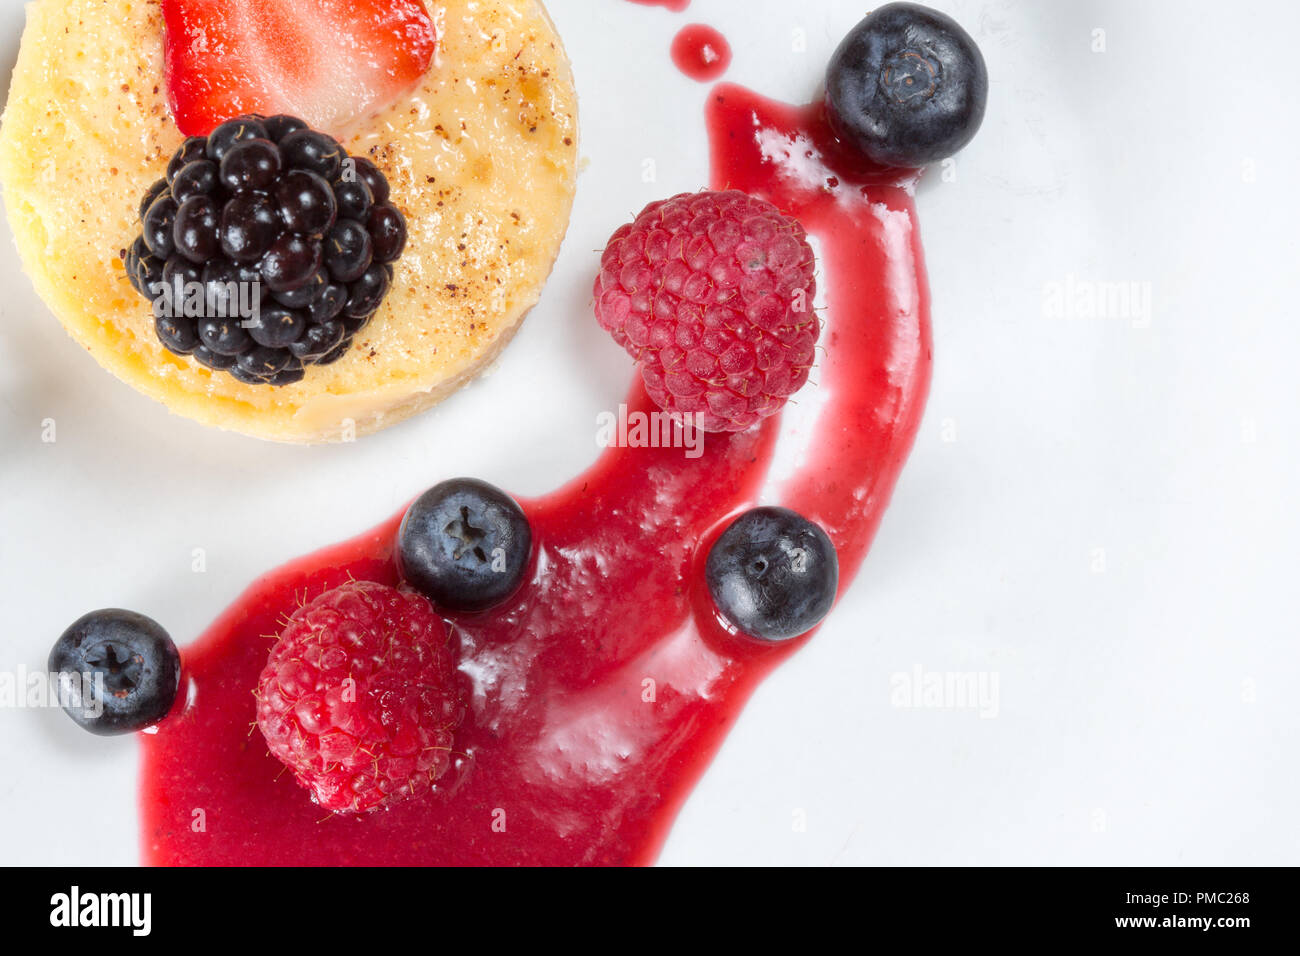 A serving of Egg custard tart with fresh strawberry, Raspberry and Blueberries with a raspberry coulis Stock Photo